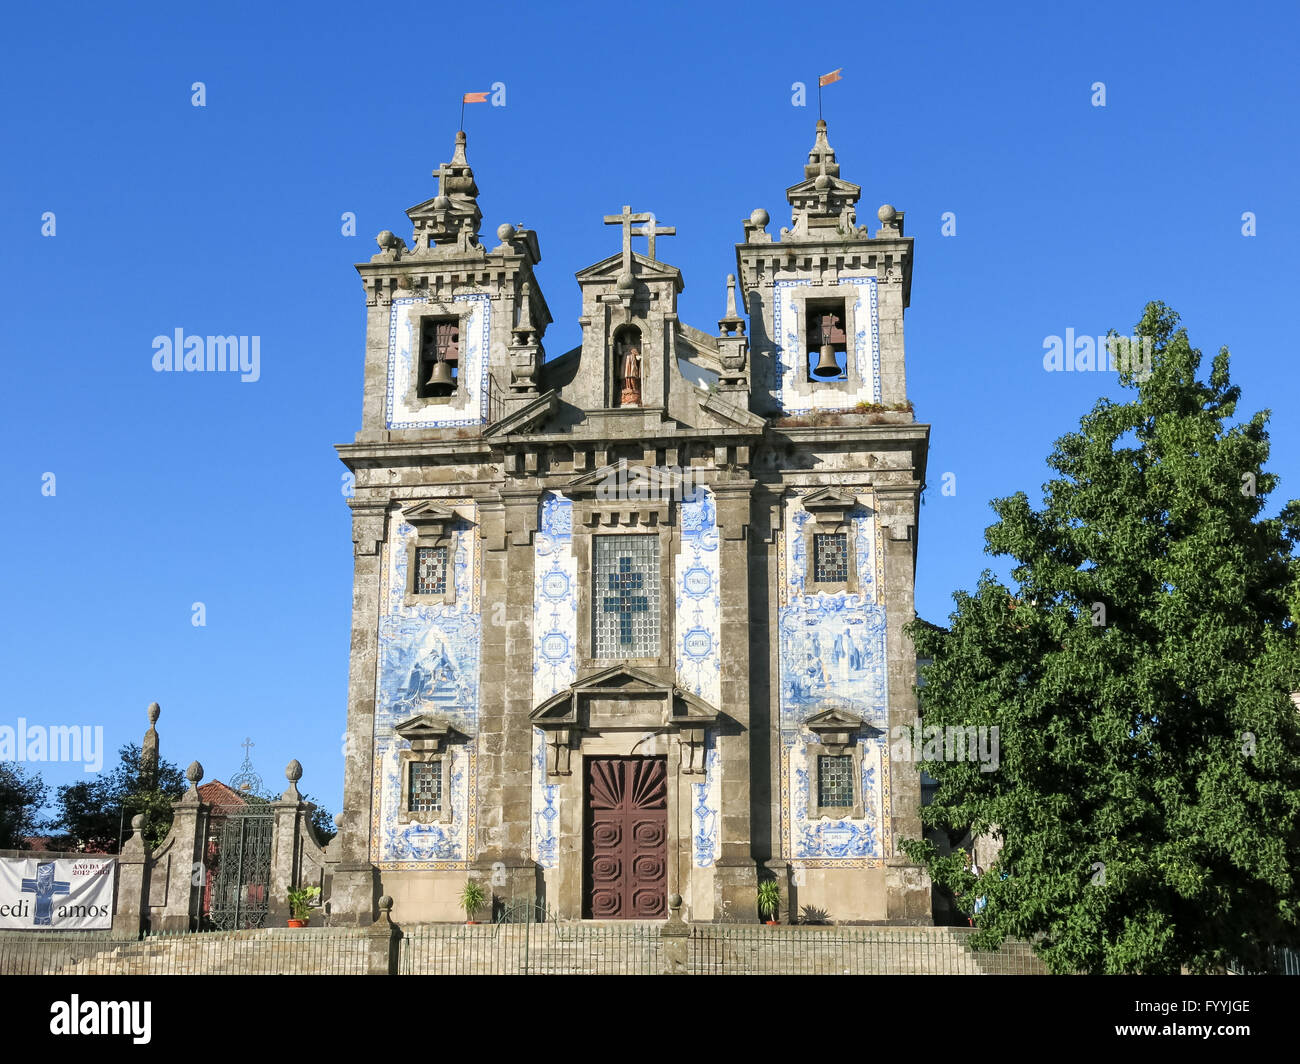 Facade of Church of Saint Ildefonso with azulejos tile work on Batalha Square in Porto, Portugal Stock Photo